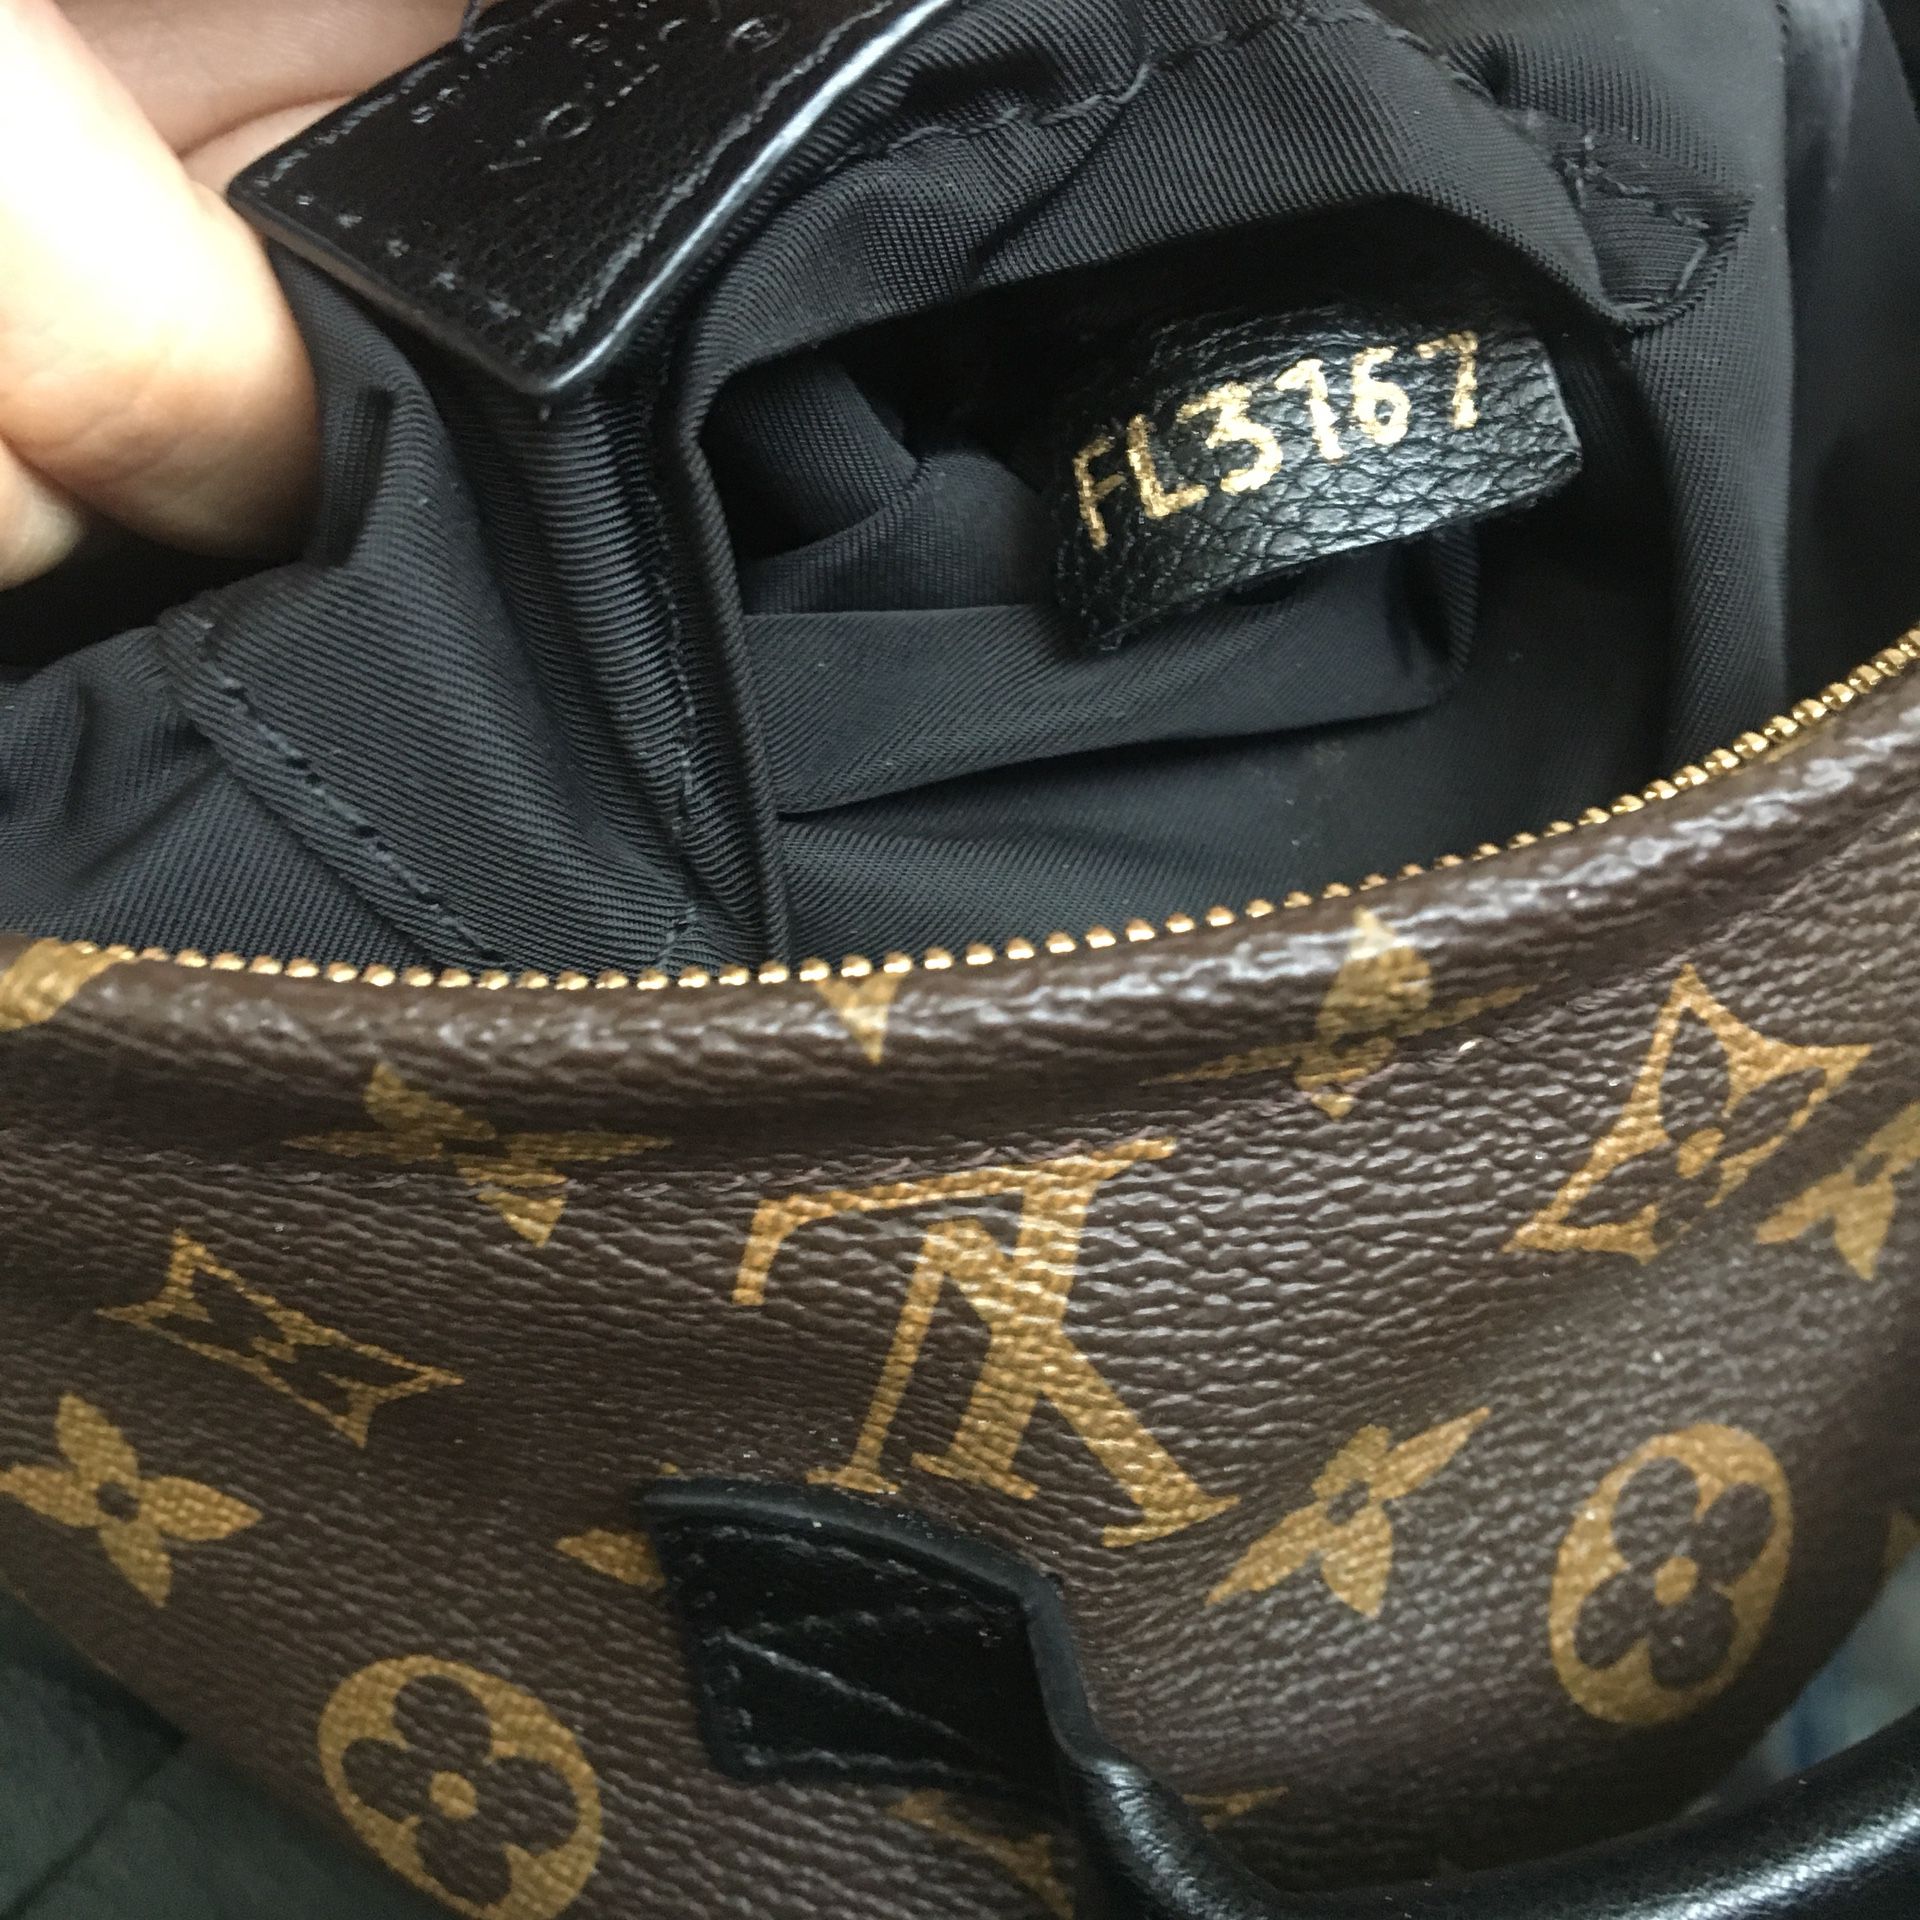 Louis Vuitton Palm Springs backpack, barely used, - Depop